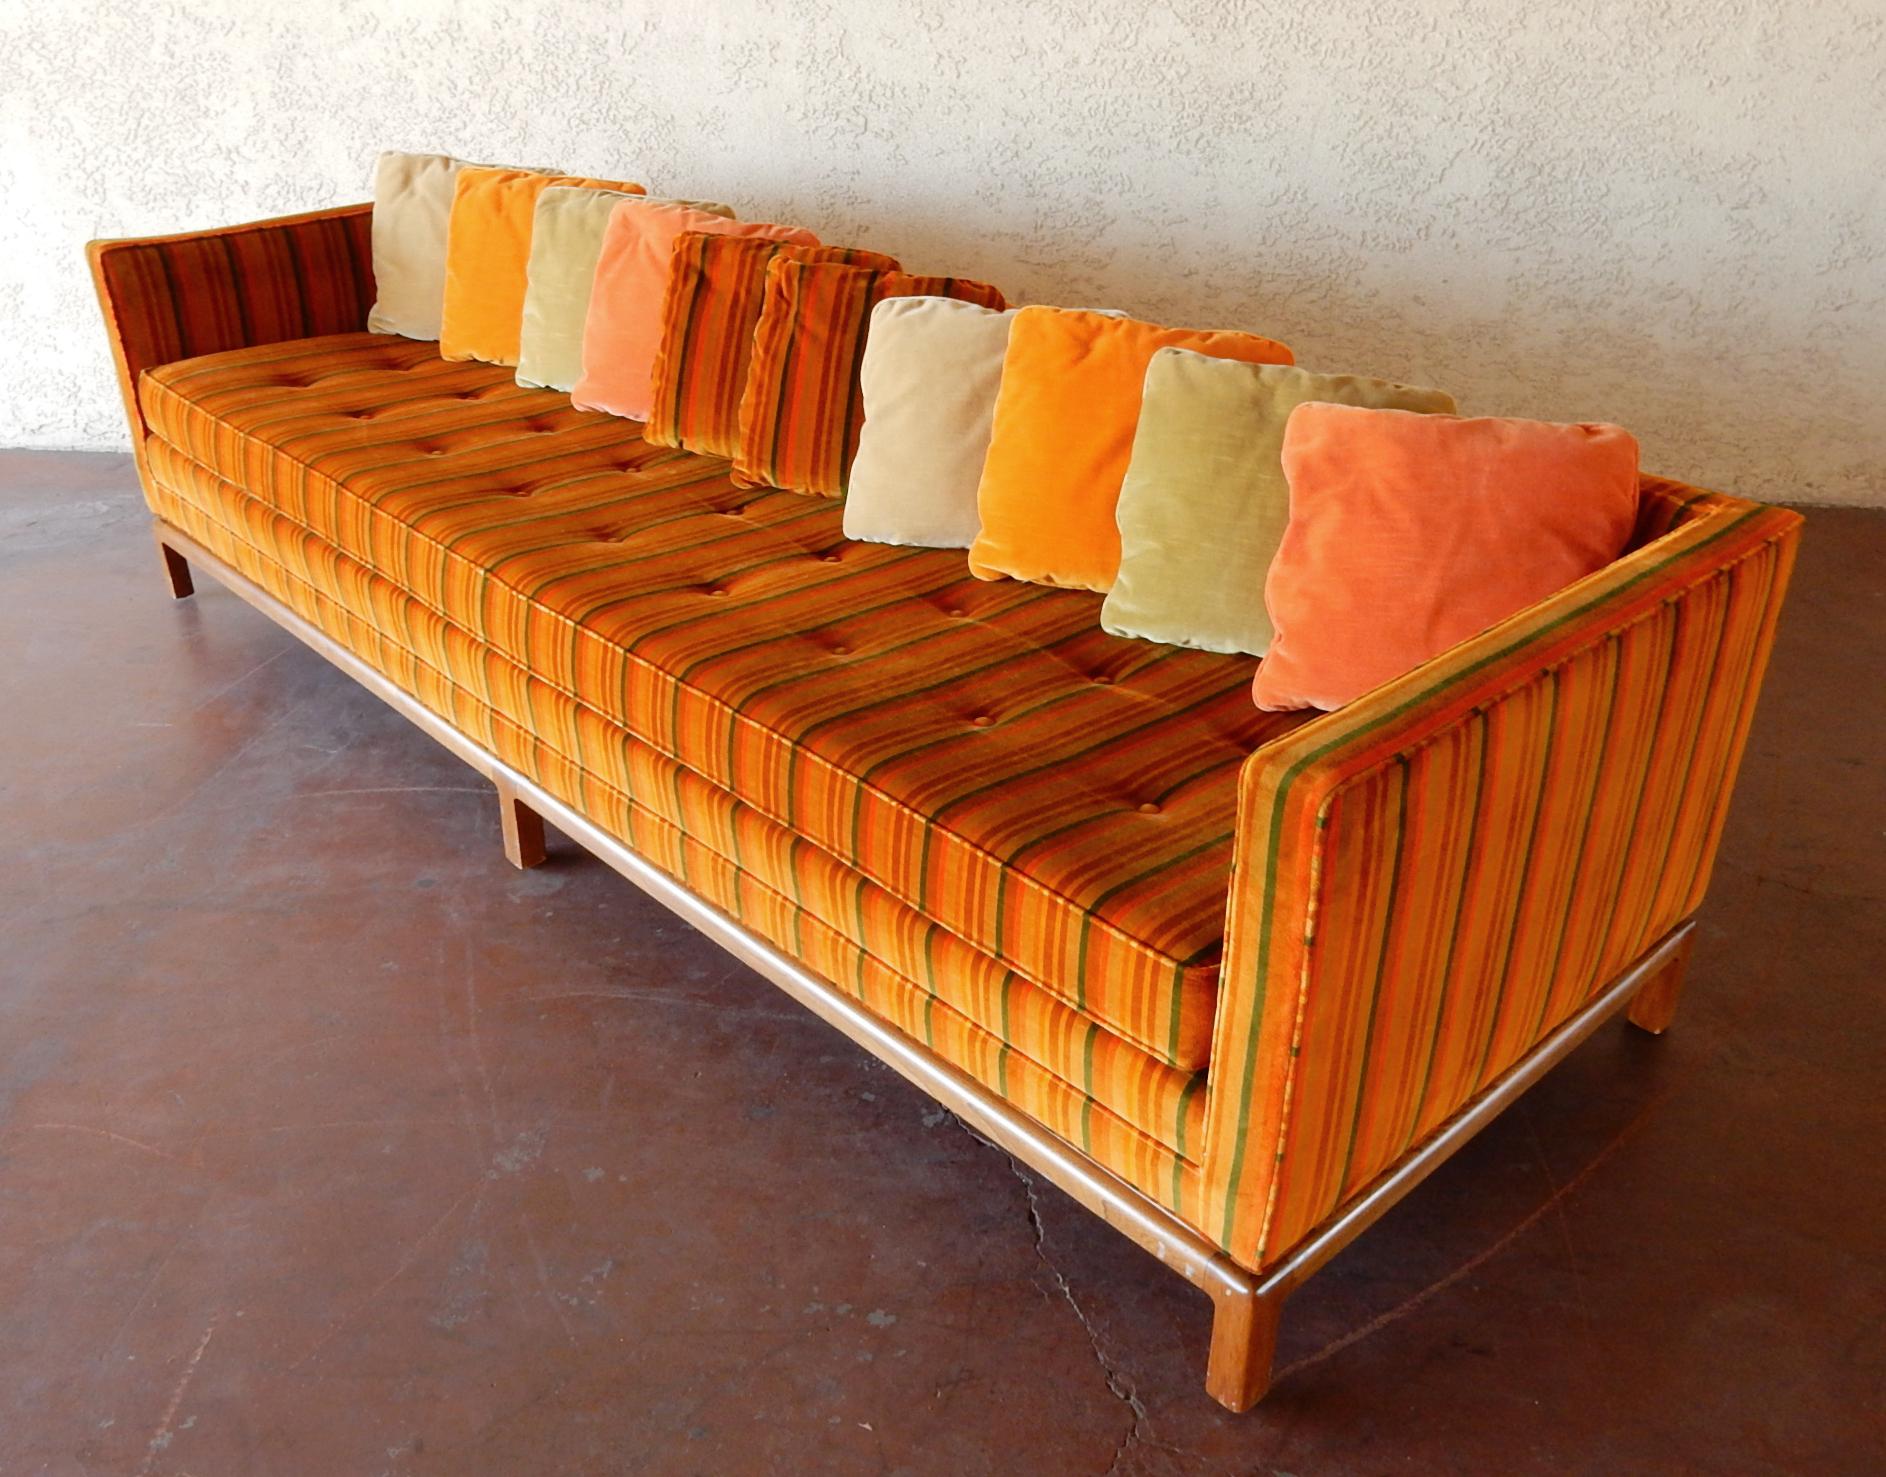 Electrifying 8 foot midcentury sofa by Flair Inc, a division of Bernhardt Furniture of the 1960s and 1970s.
Vivid muted cinnamon red, golden wheat and orange hue Jack Lenor Larsen style velvet upholstery.
A single seat cushion with 10 original